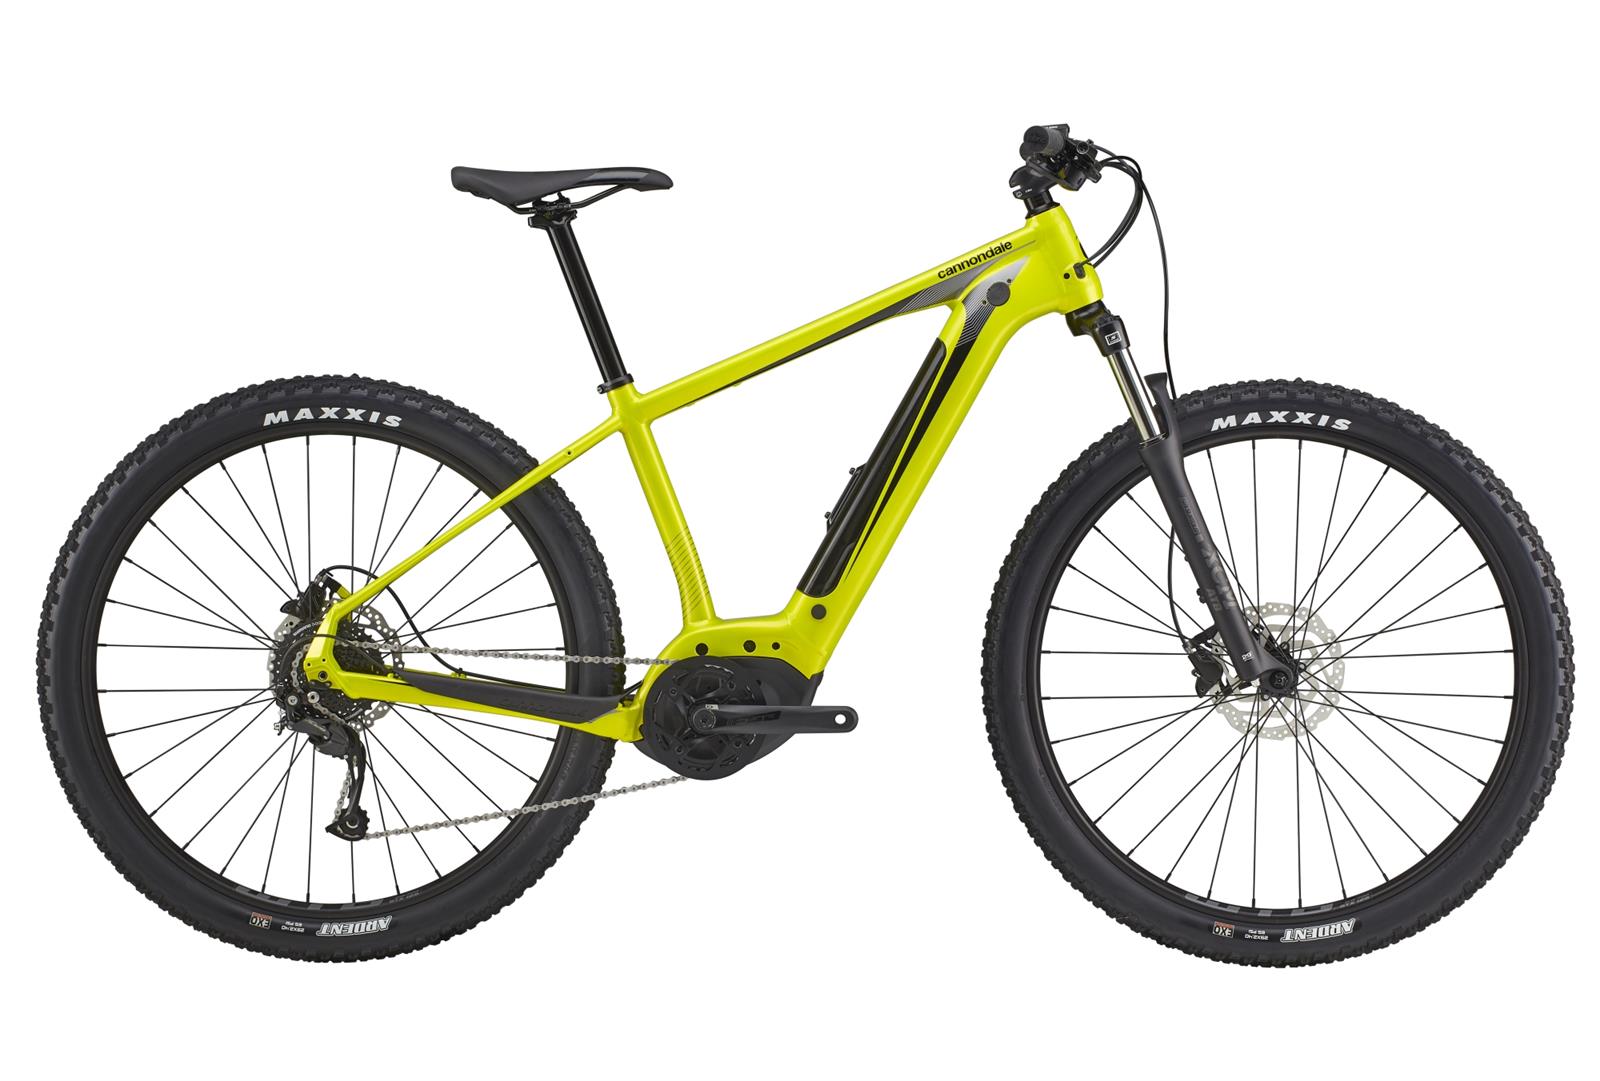 CANNONDALE Trail Neo 4